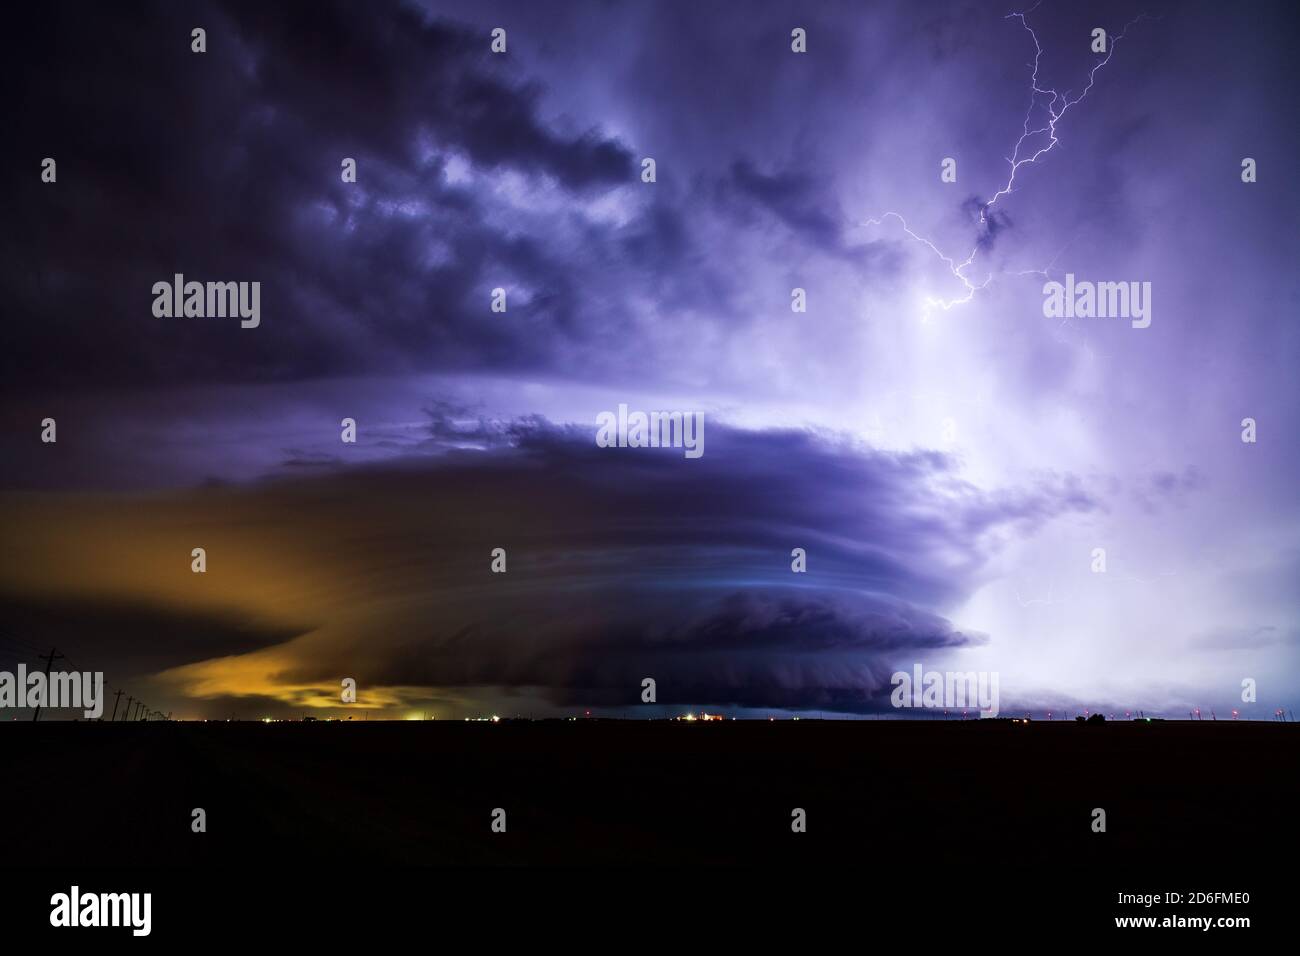 Lightning illuminates a supercell thunderstorm with dramatic storm clouds during a severe weather event over Dodge City, Kansas Stock Photo